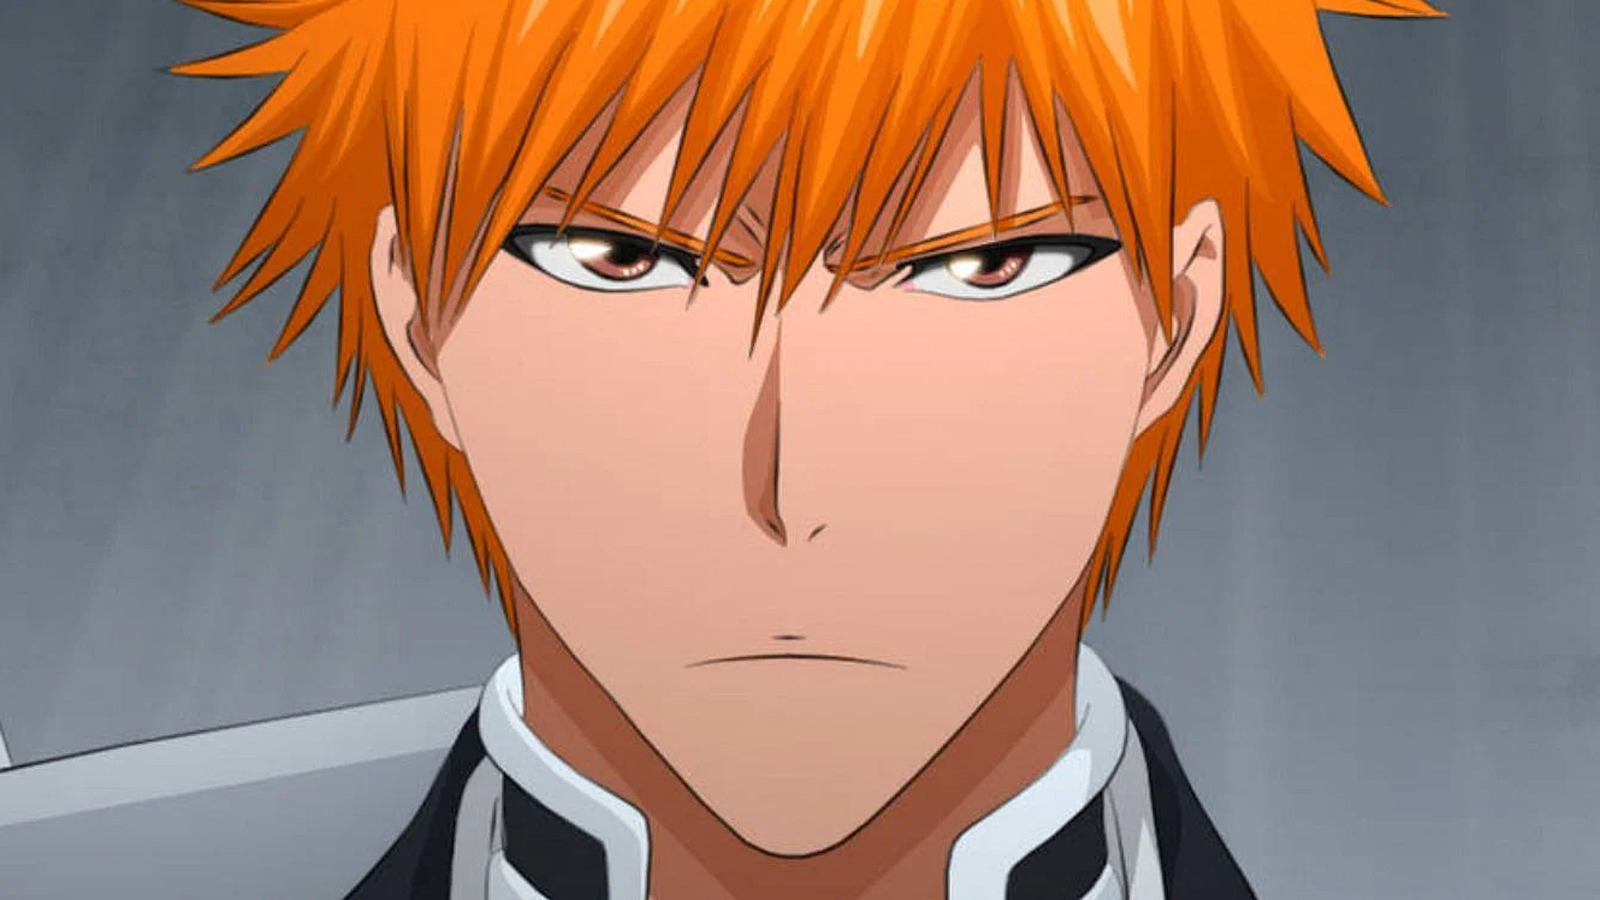 10 strongest characters in Bleach, ranked based on their strength